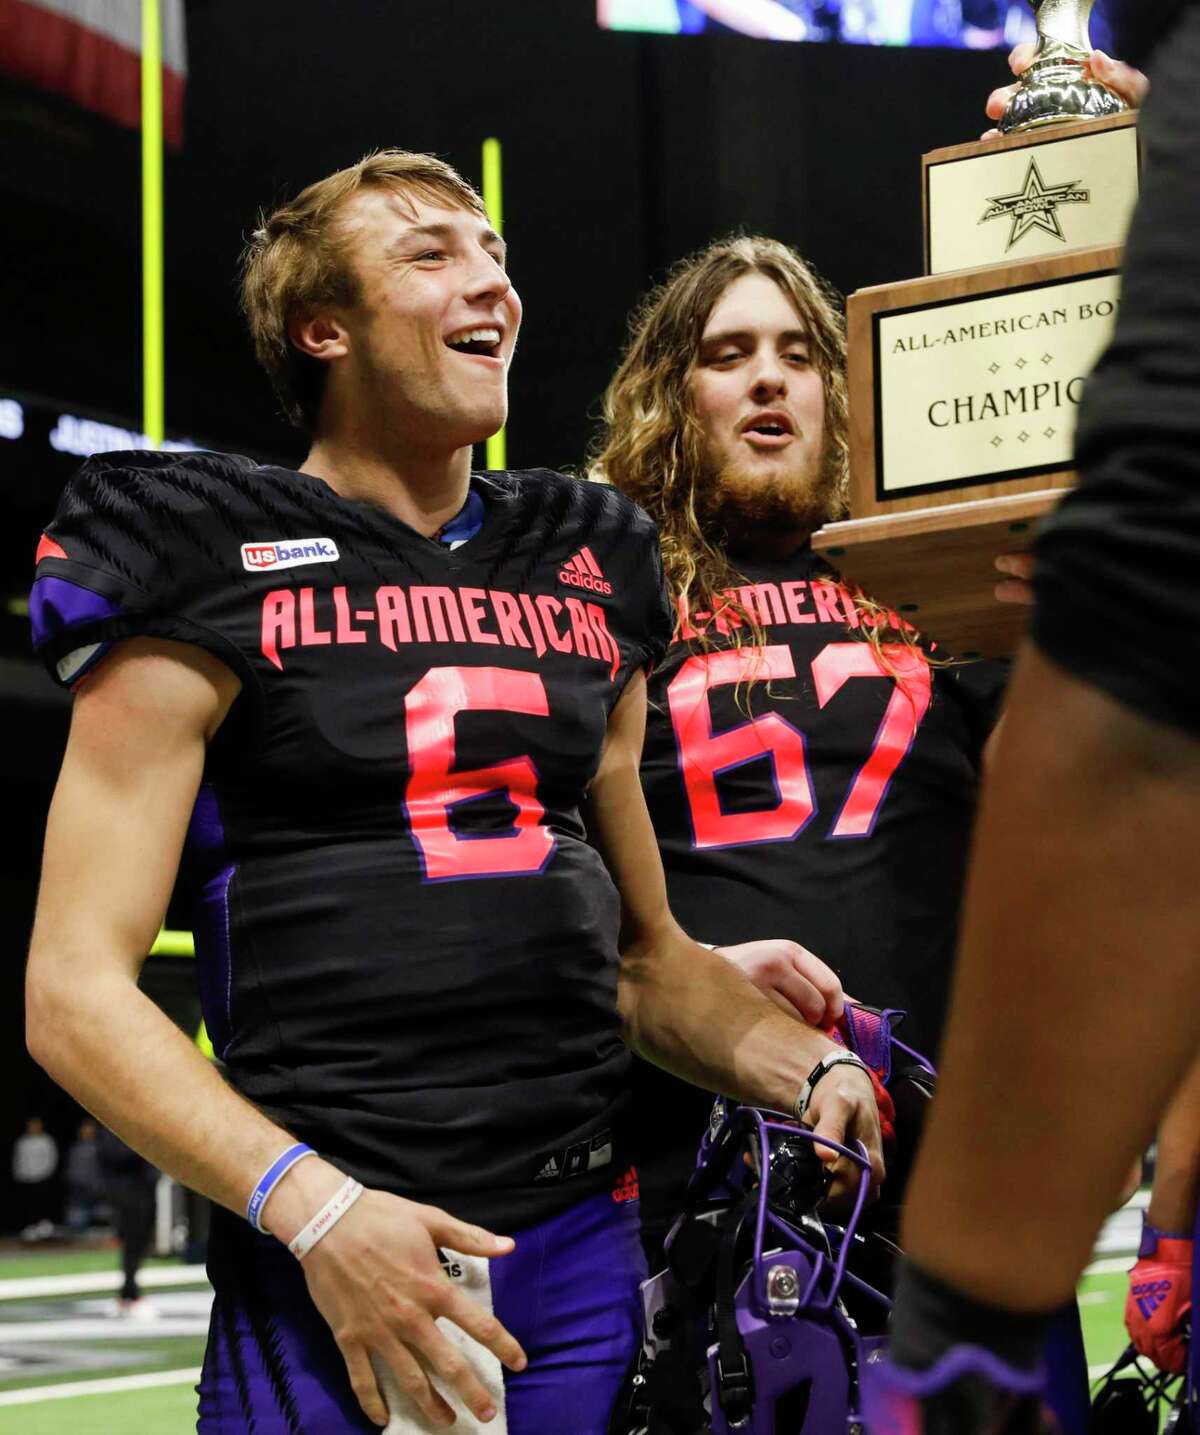 West team’s quarterback Cade Klubnik (6) of Westlake High School in Austin and Hunter Erb (67) of Eaton High School Haslet, Texas, react to being awarded the 2022 All-American Bowl trophy at the Alamodome in San Antonio, Texas, Saturday, Jan. 8, 2022. West defeated East 34-14.